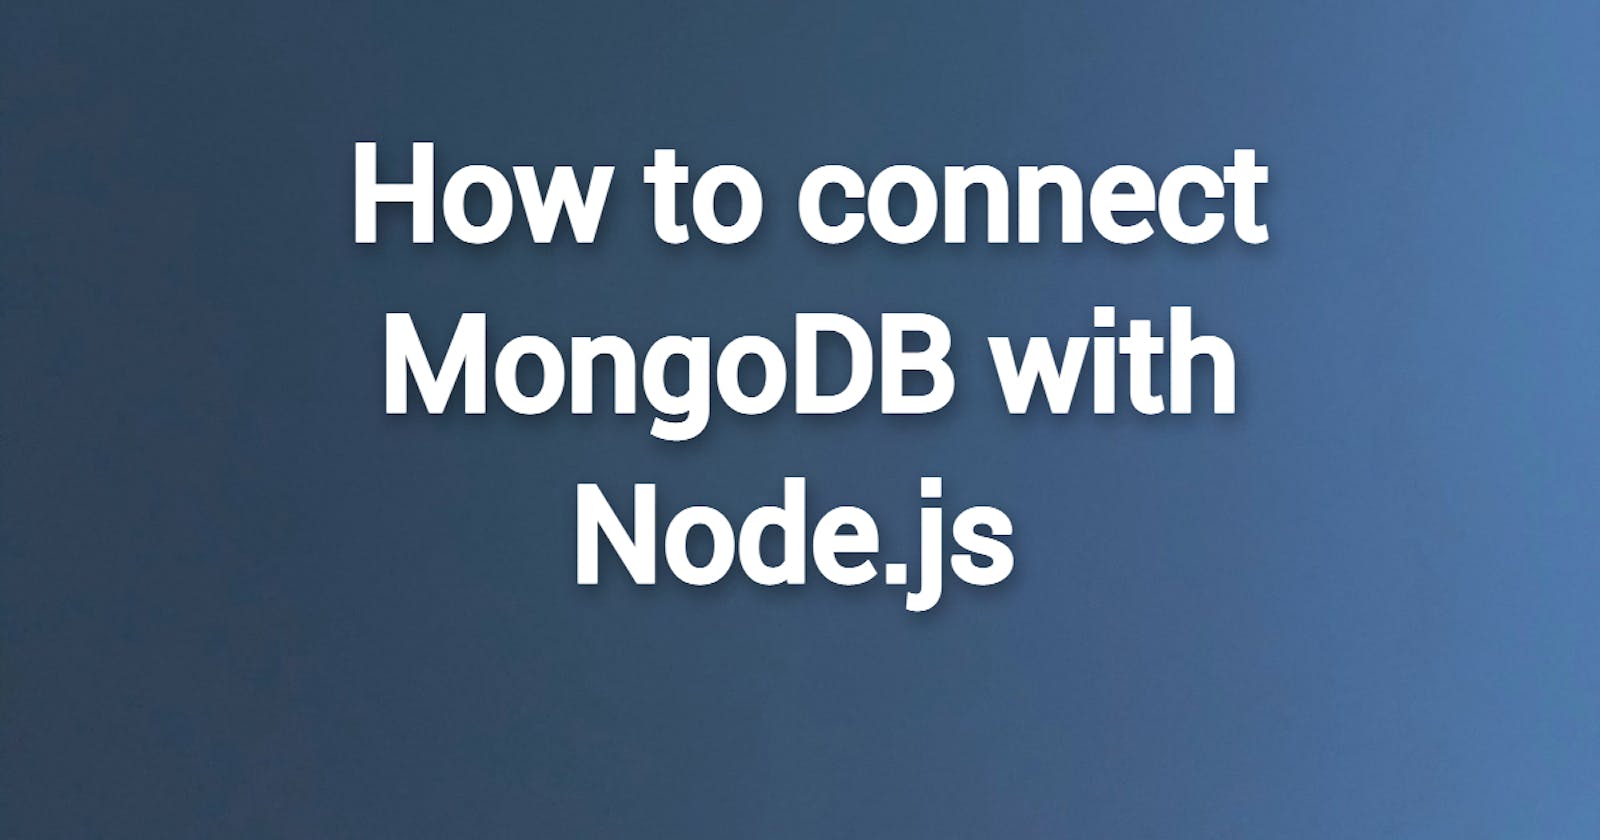 How to connect MongoDB with Node.js